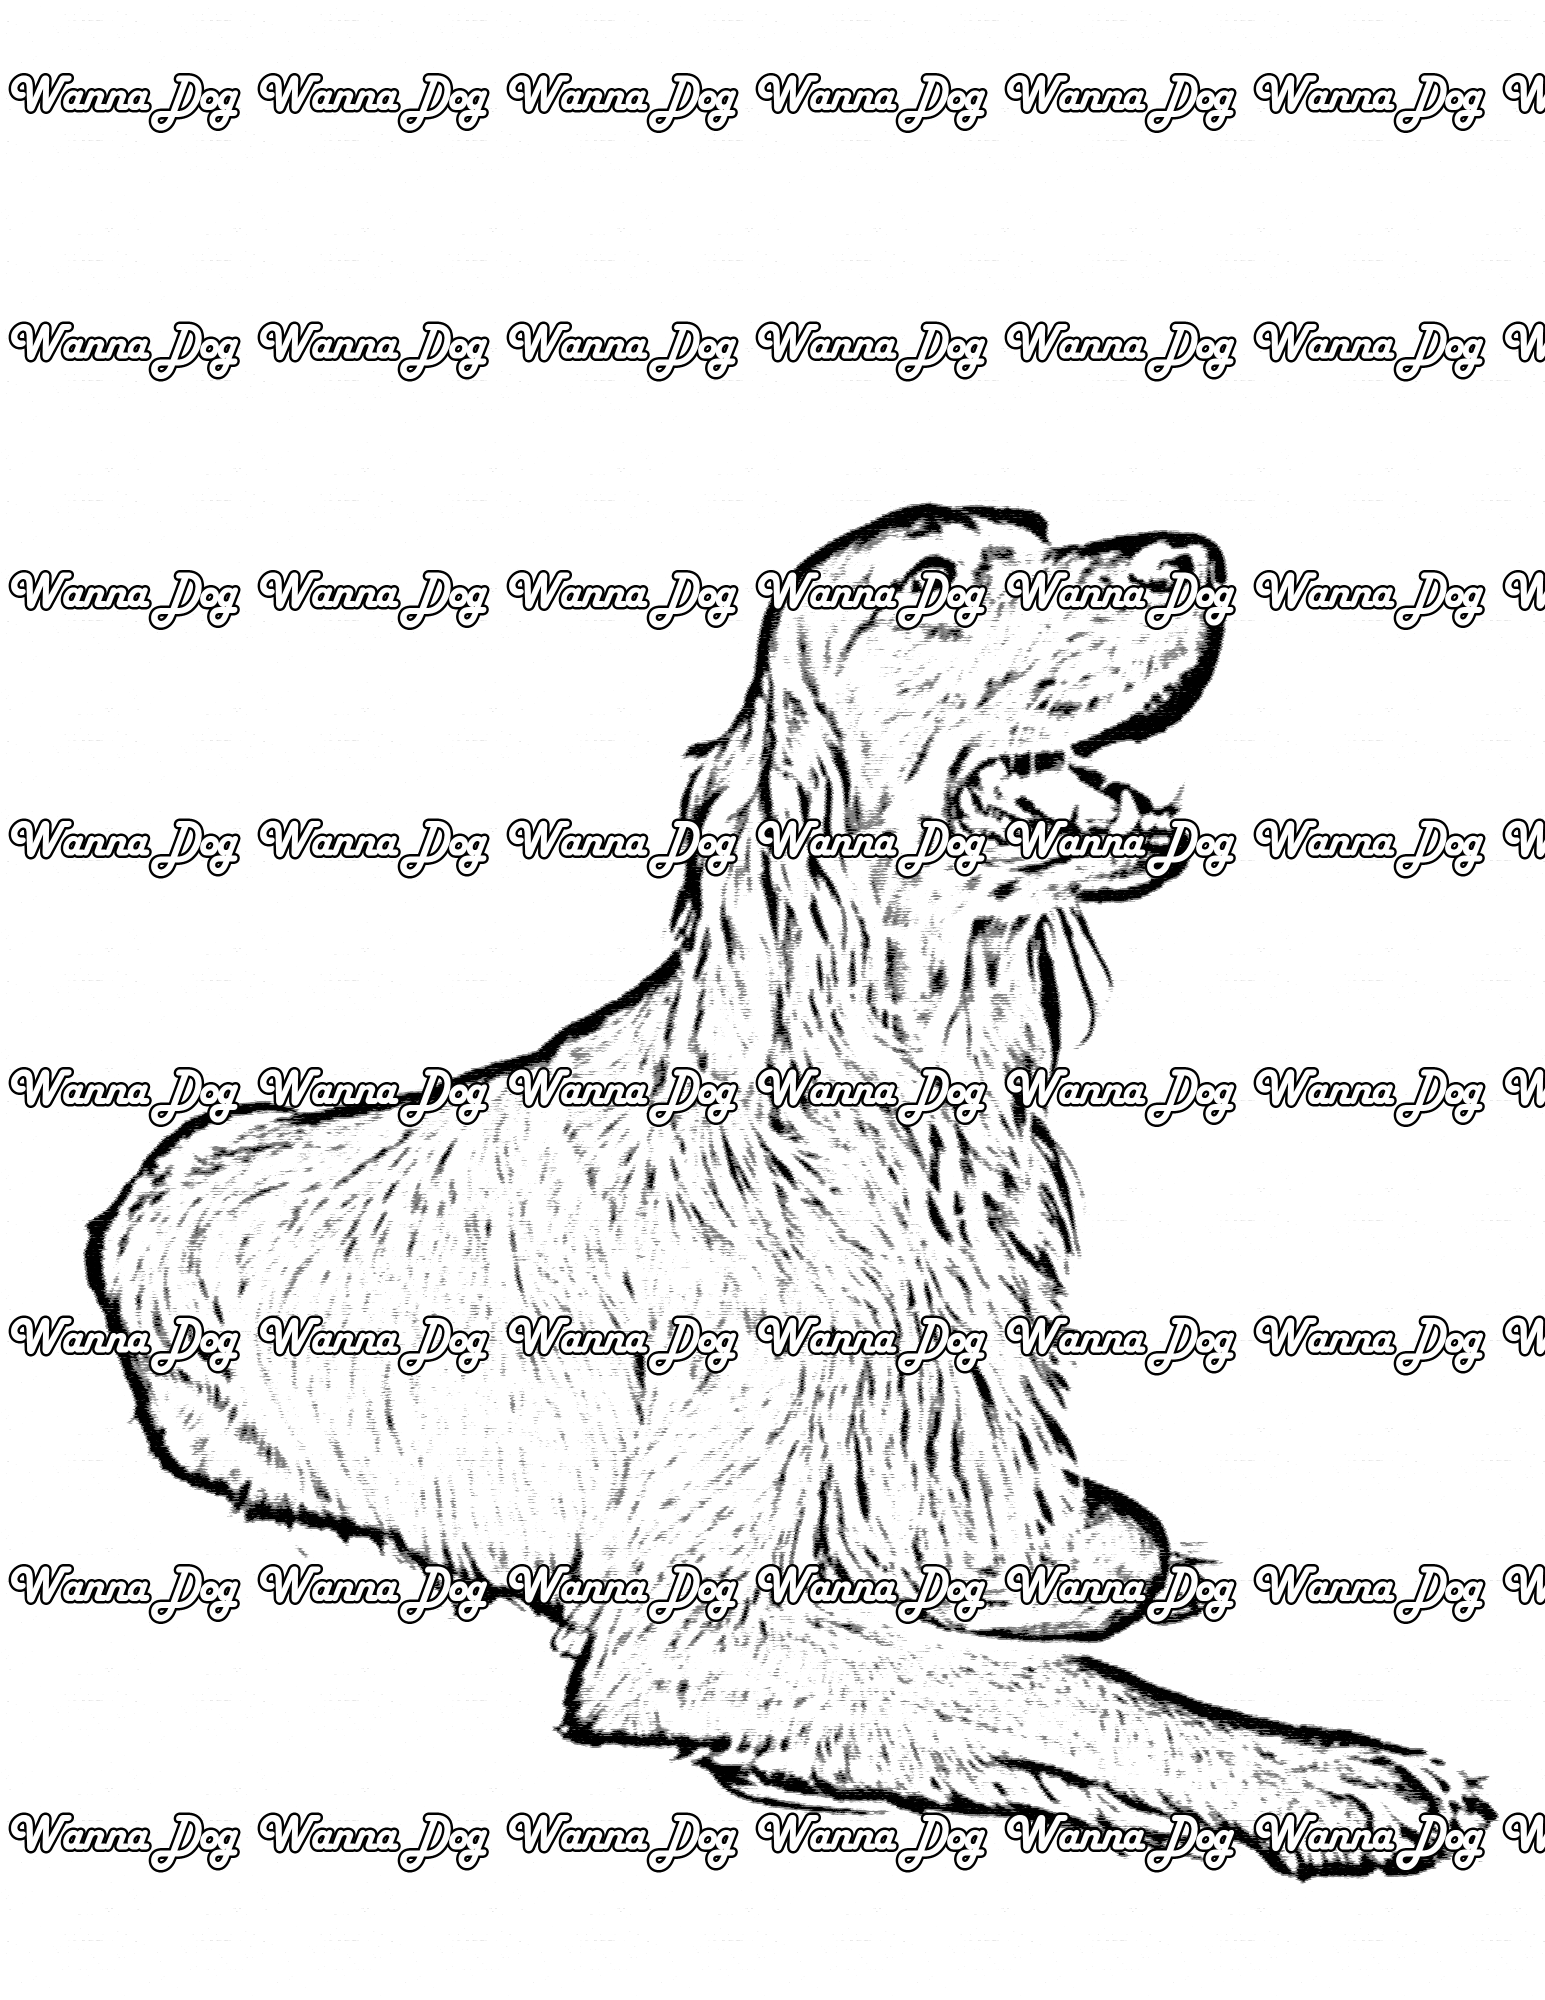 Irish Setter Coloring Page of a Irish Setter sitting down and looking up